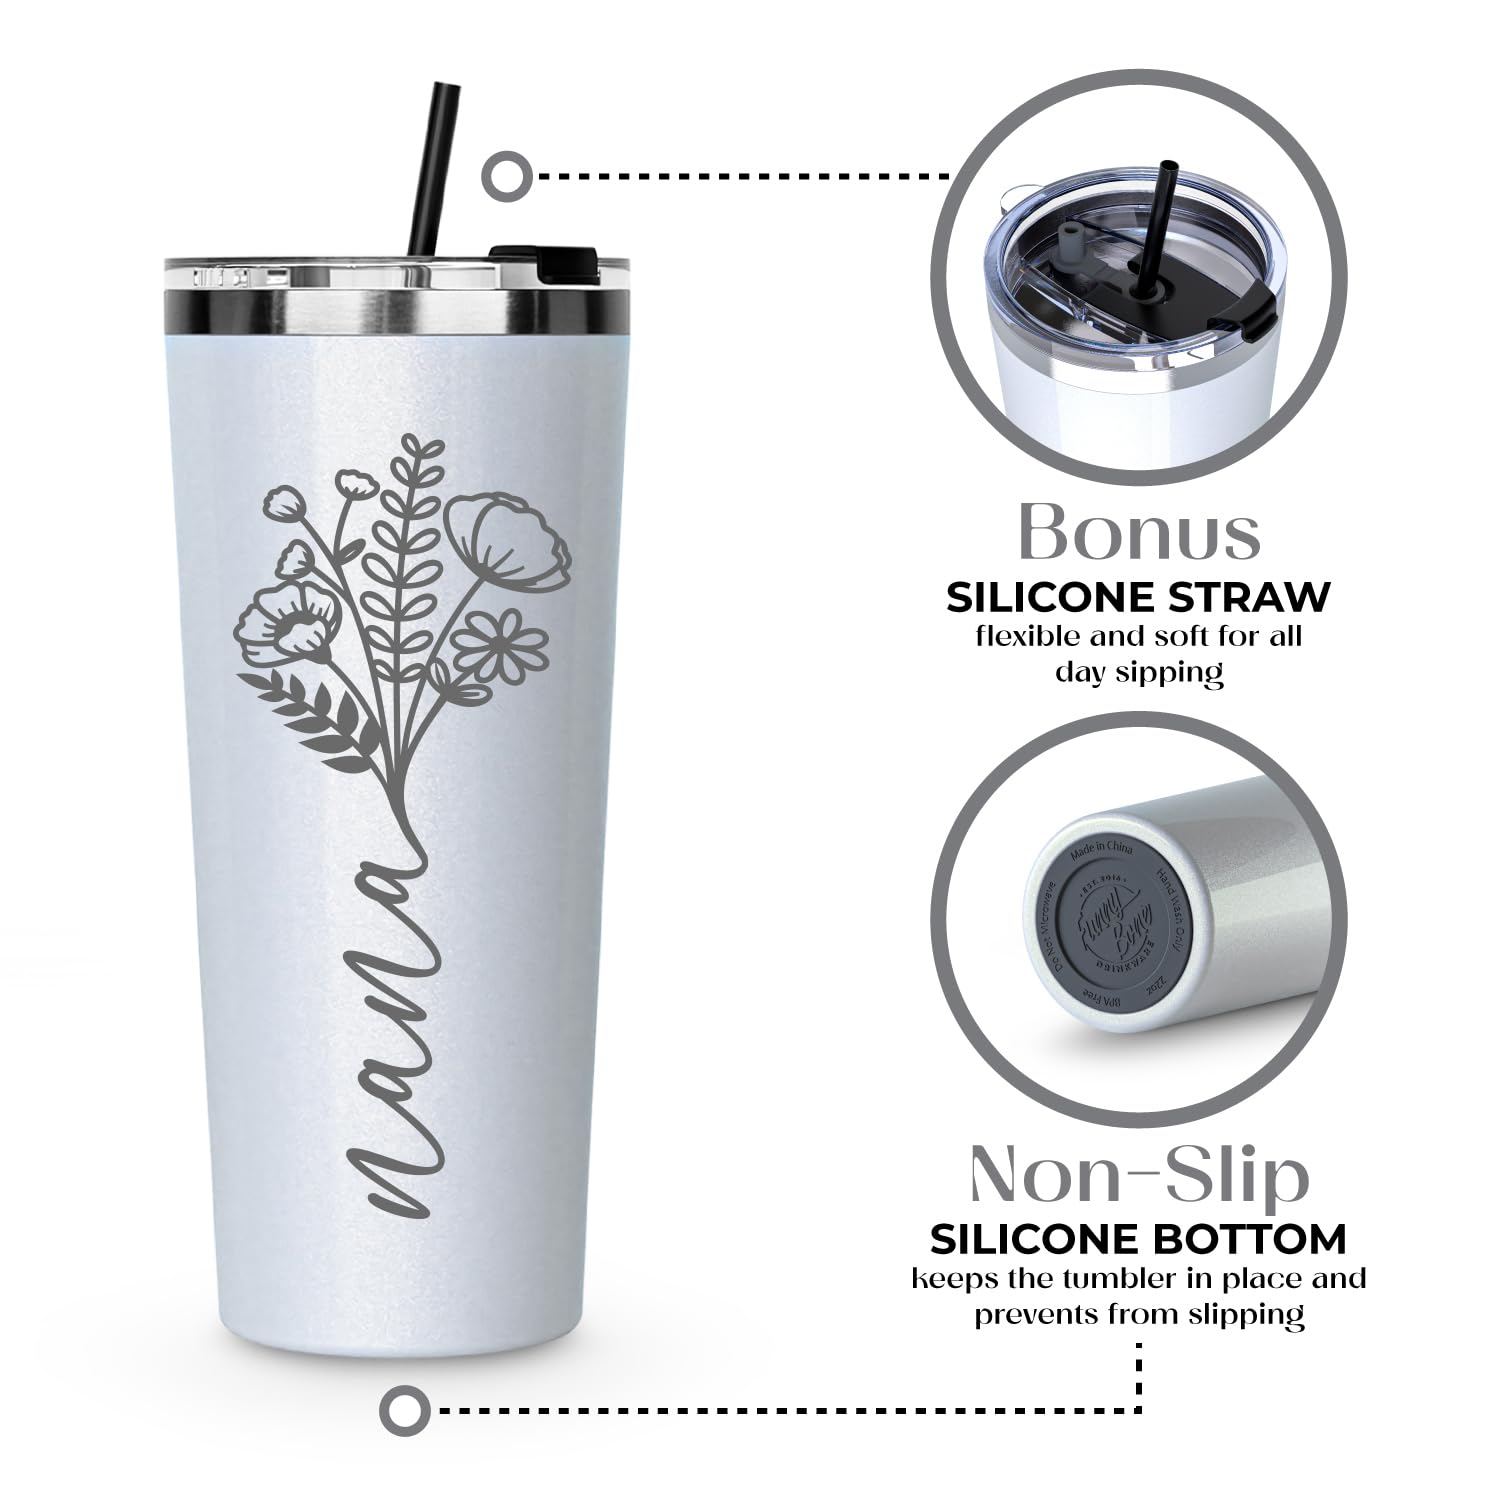 Nana Gifts Tumbler Mug - Mother's Day Gift for Best Nana Ever - Grandma Birthday or Christmas Presents From Grandkids, Grandchildren, Travel Coffee Water Tumbler Cup Bottle with Lid & Straw 22oz